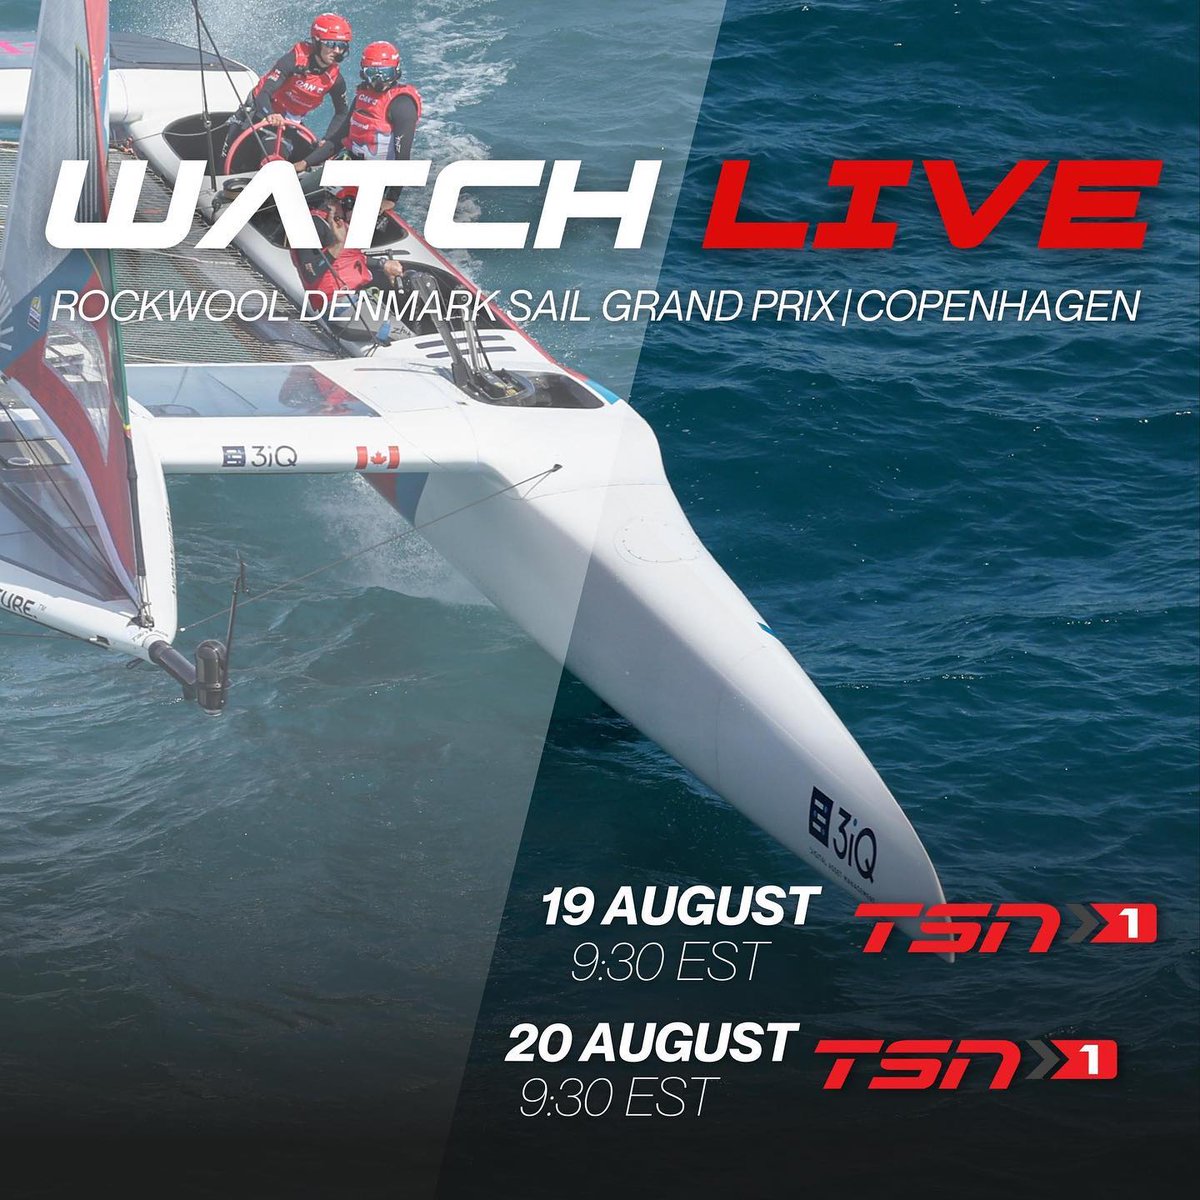 Tune in to watch @SailGPCAN at the Rockwool Denmark Sail Grand Prix live from Copenhagen. We can't wait to see our #impactpartner soar to victory! 

#weCANinspire #sailgpCAN #SailGP